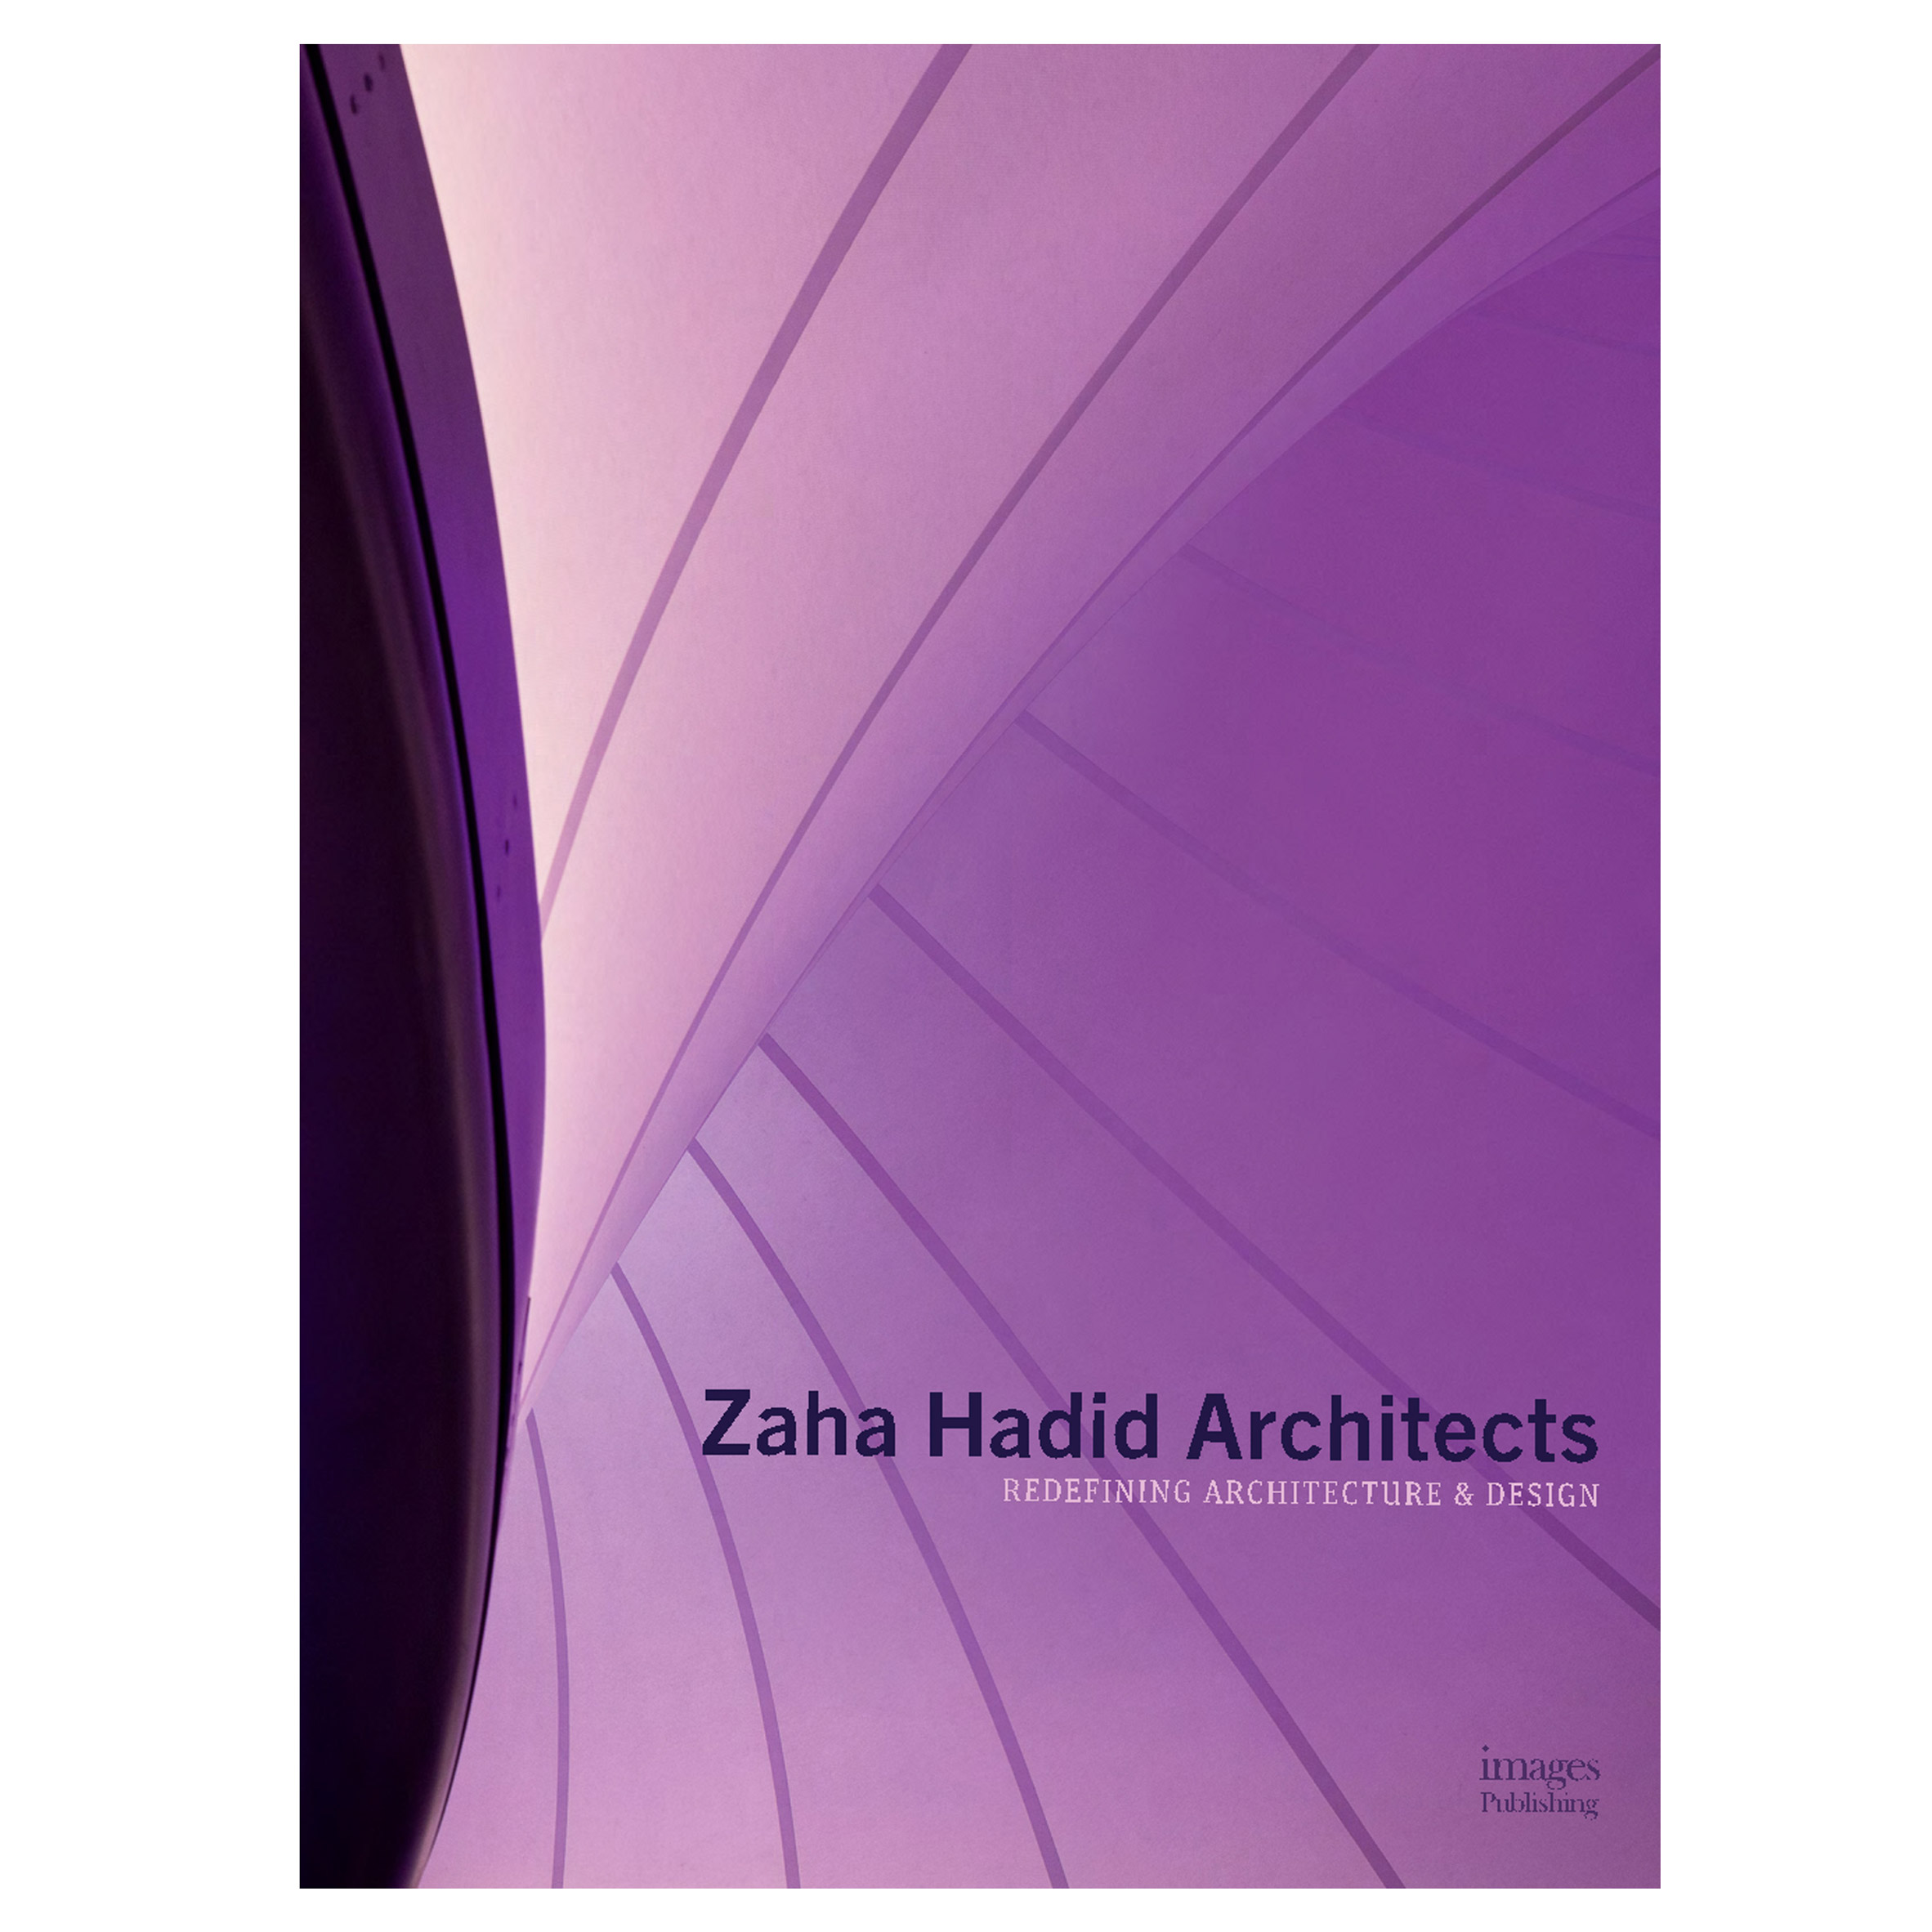 Competition: win a book celebrating the life and work of Zaha Hadid